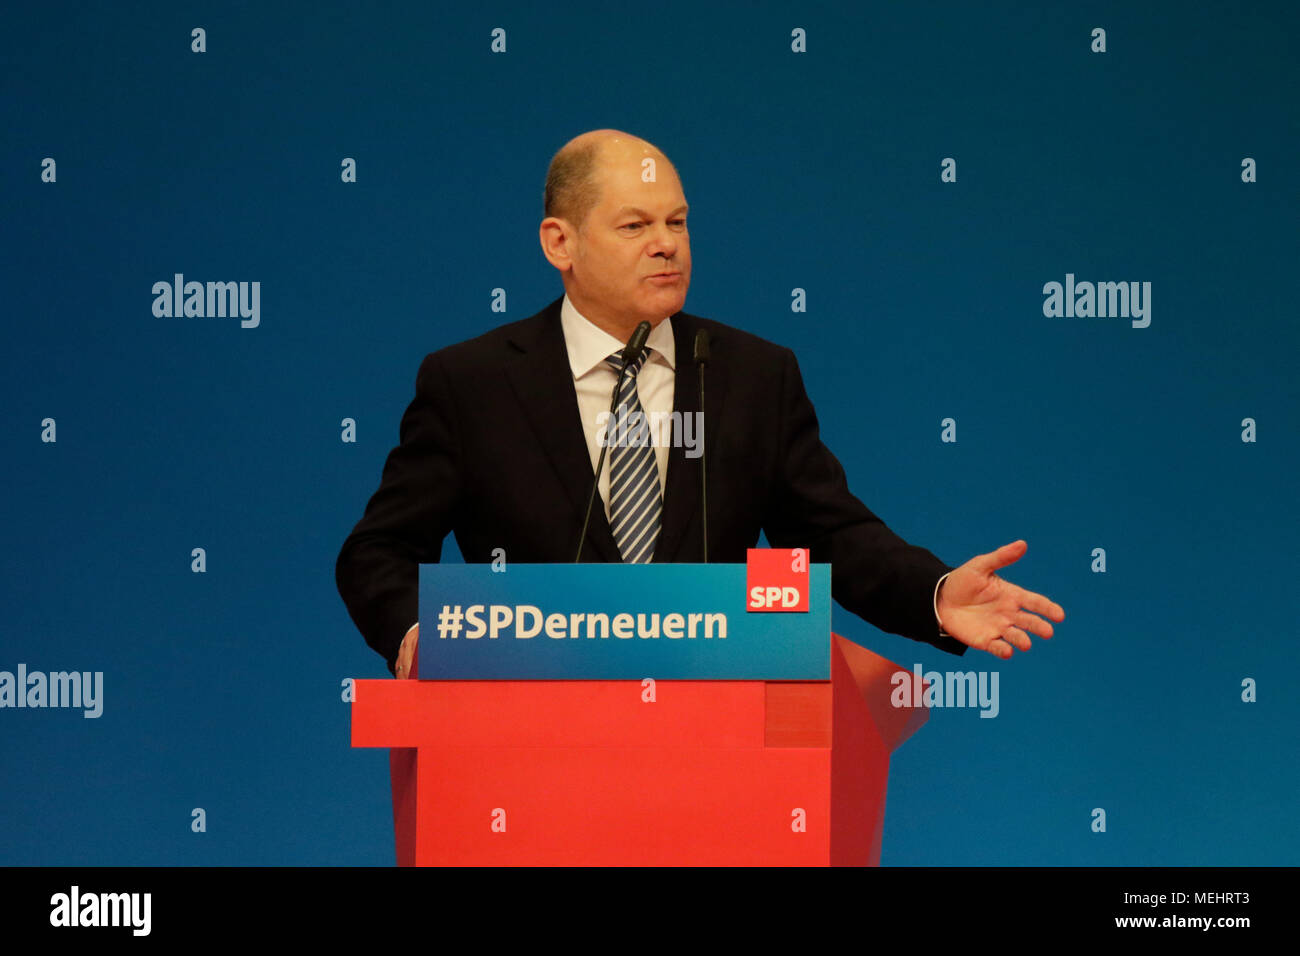 Wiesbaden, Germany. 22nd April 2018. Olaf Scholz, the German Federal Minister of Finance and Vice-Chancellor as well as the acting chairman of the SPD, addresses the party convention. Andrea Nahles, the leader of the parliamentary party of the SPD in the Bundestag (German Parliament) has been elected as the new chairwoman of the SPD (Social Democratic Party of Germany). Credit: Michael Debets/Alamy Live News Credit: Michael Debets/Alamy Live News Stock Photo